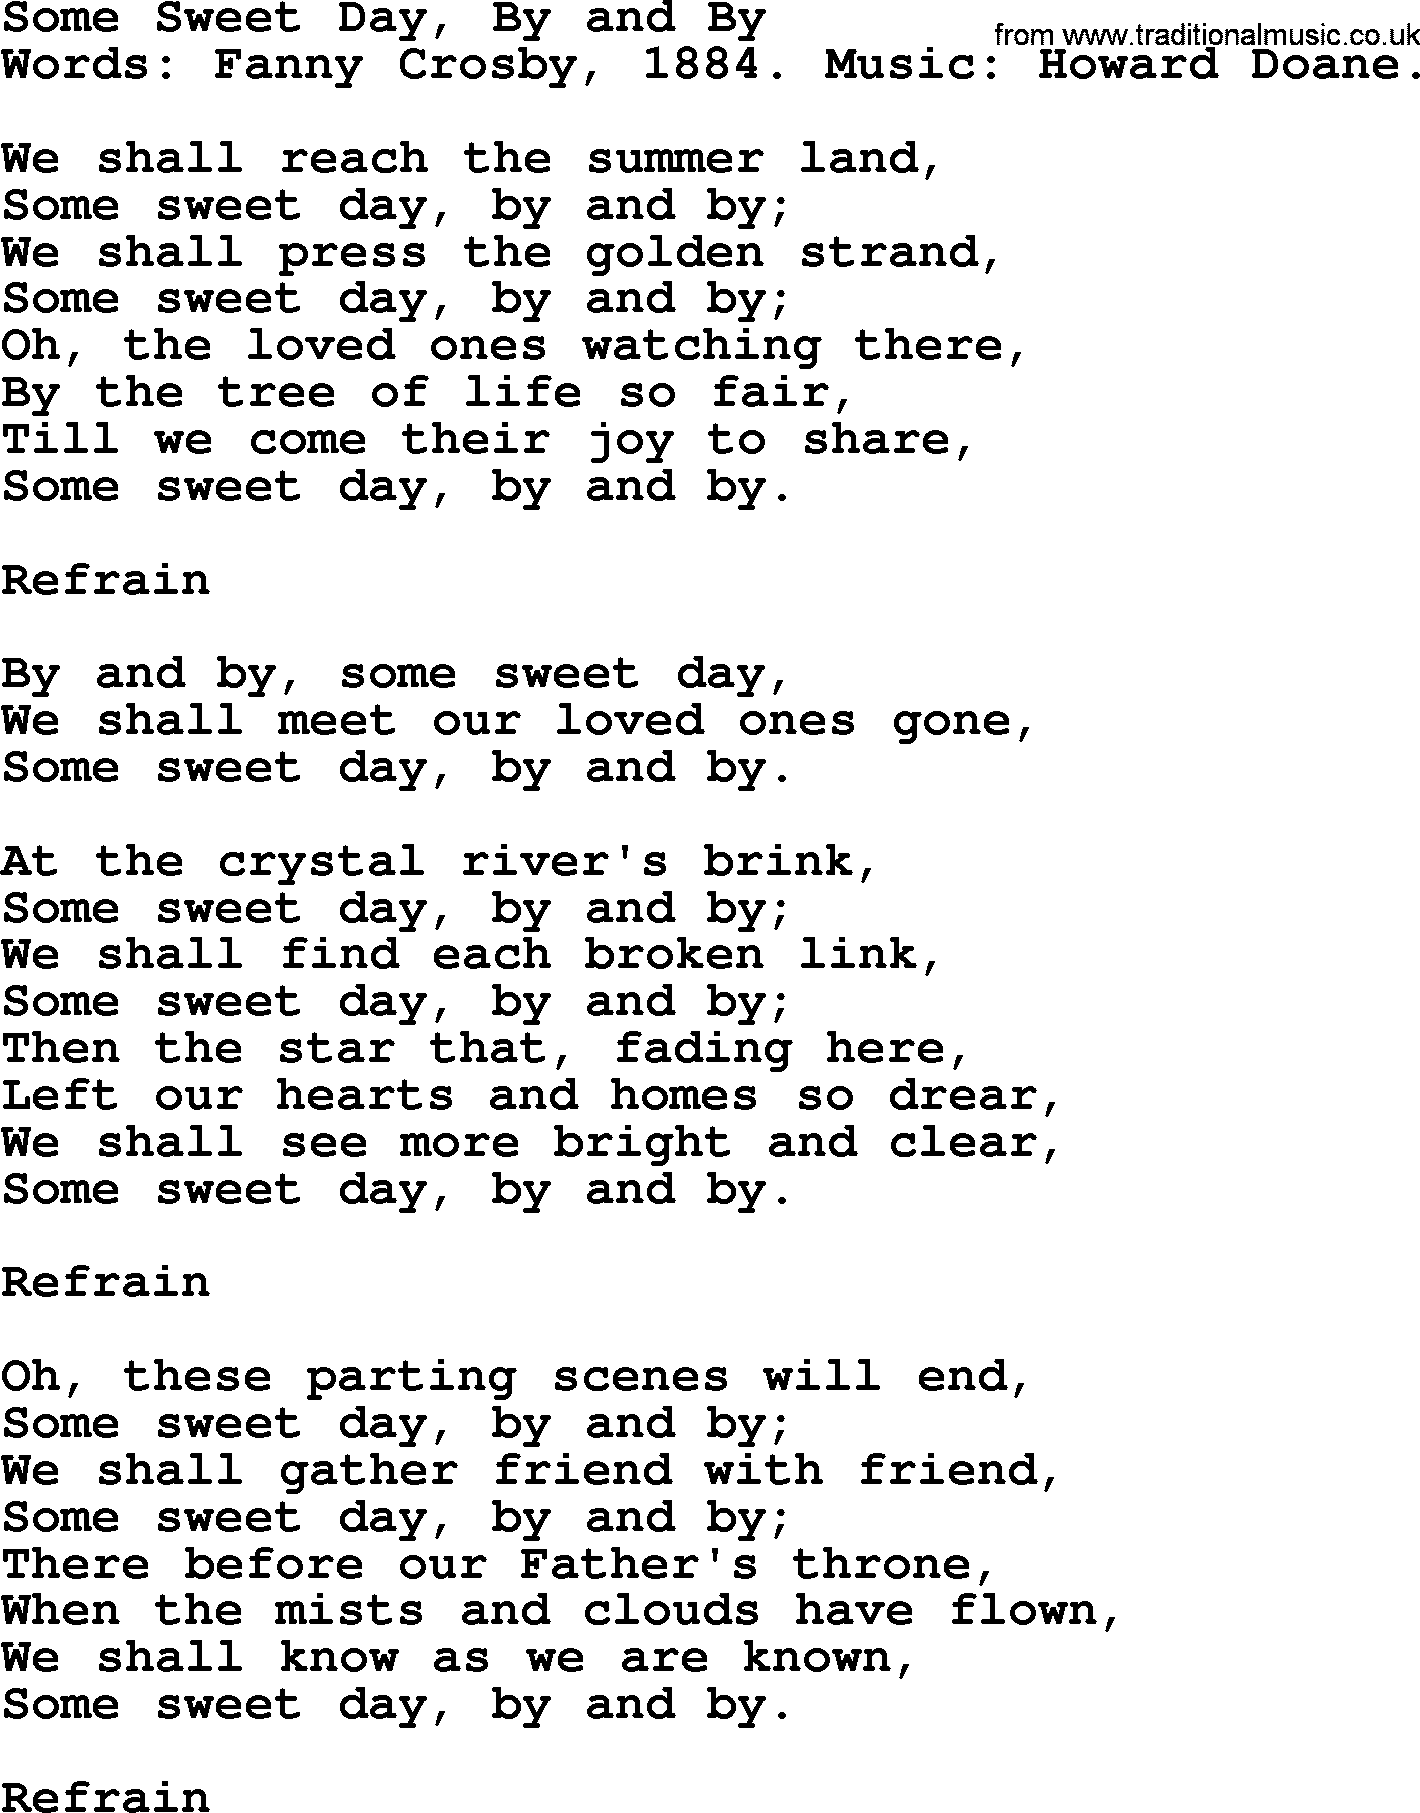 Fanny Crosby song: Some Sweet Day, By And By, lyrics